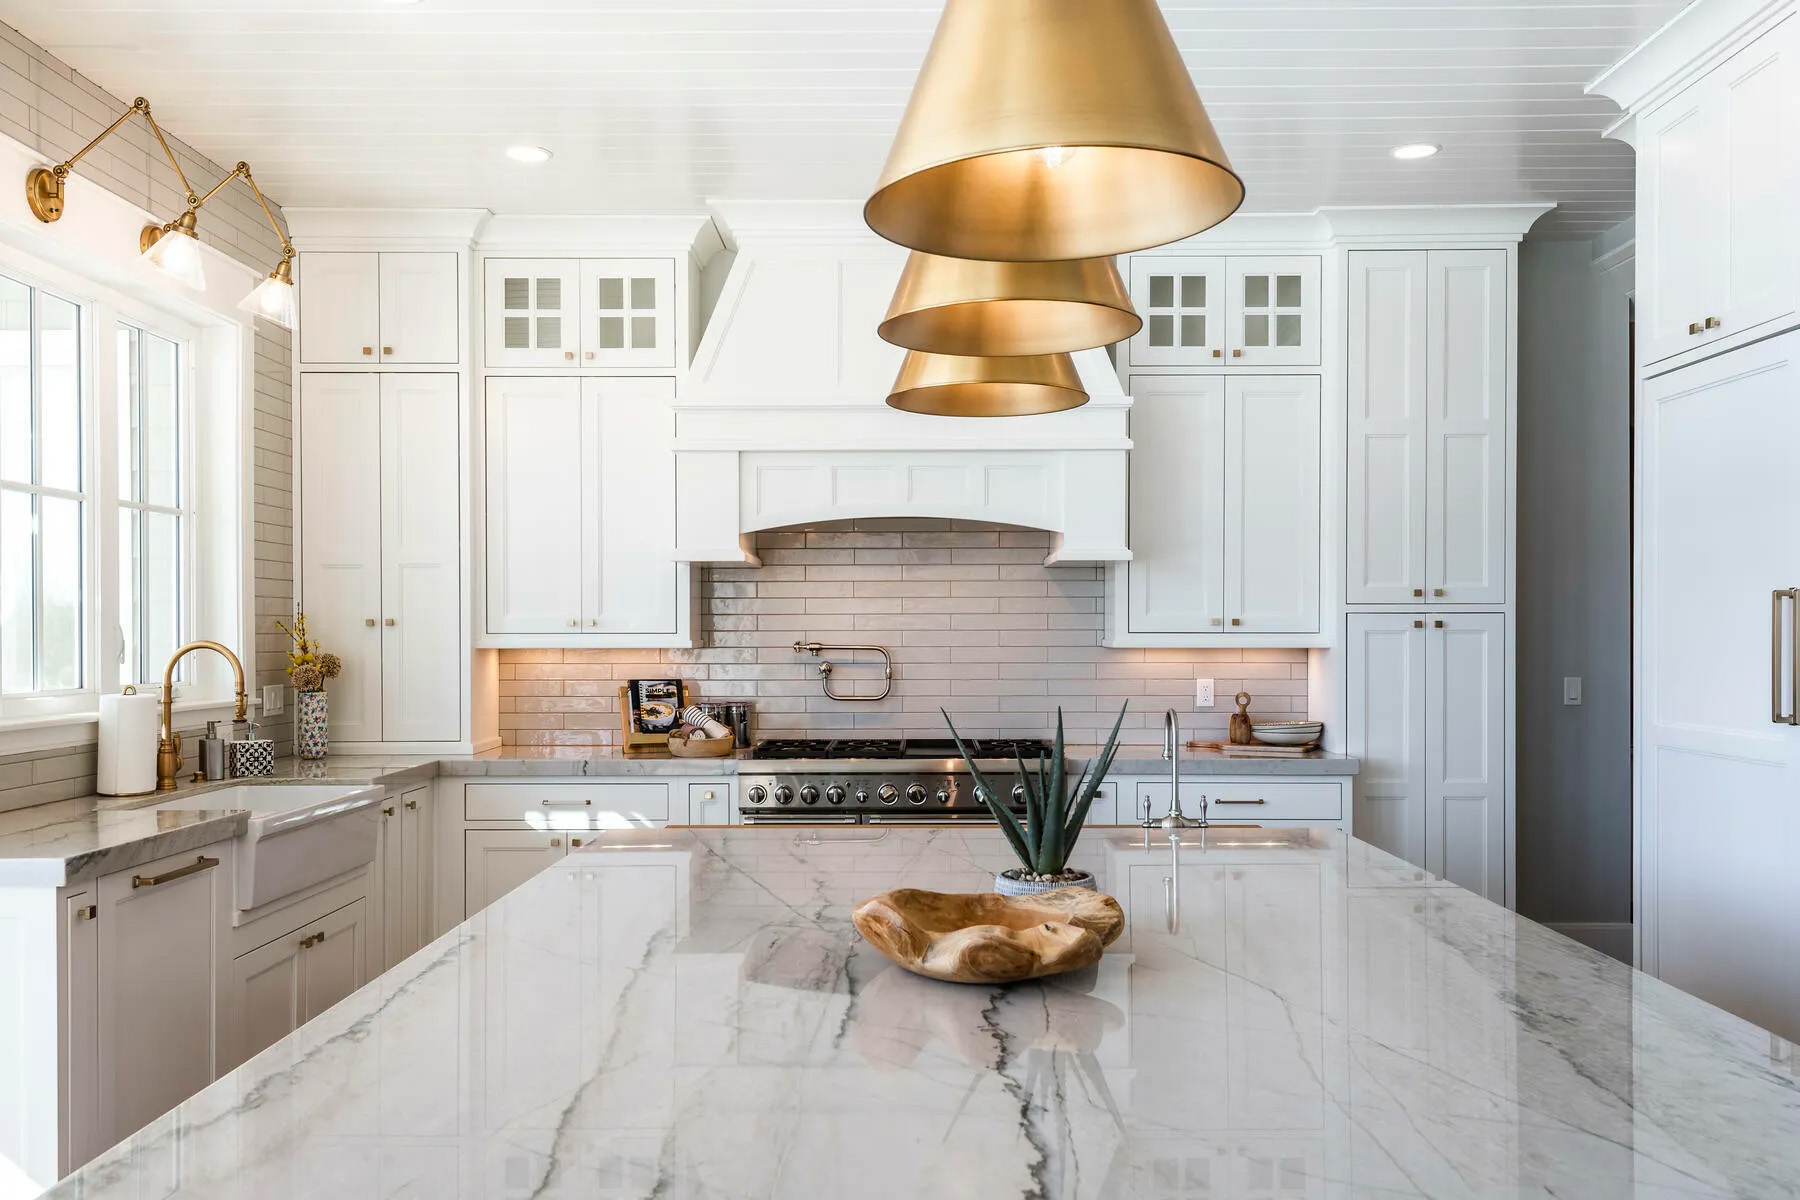 Marble island countertop with three gold pendants.